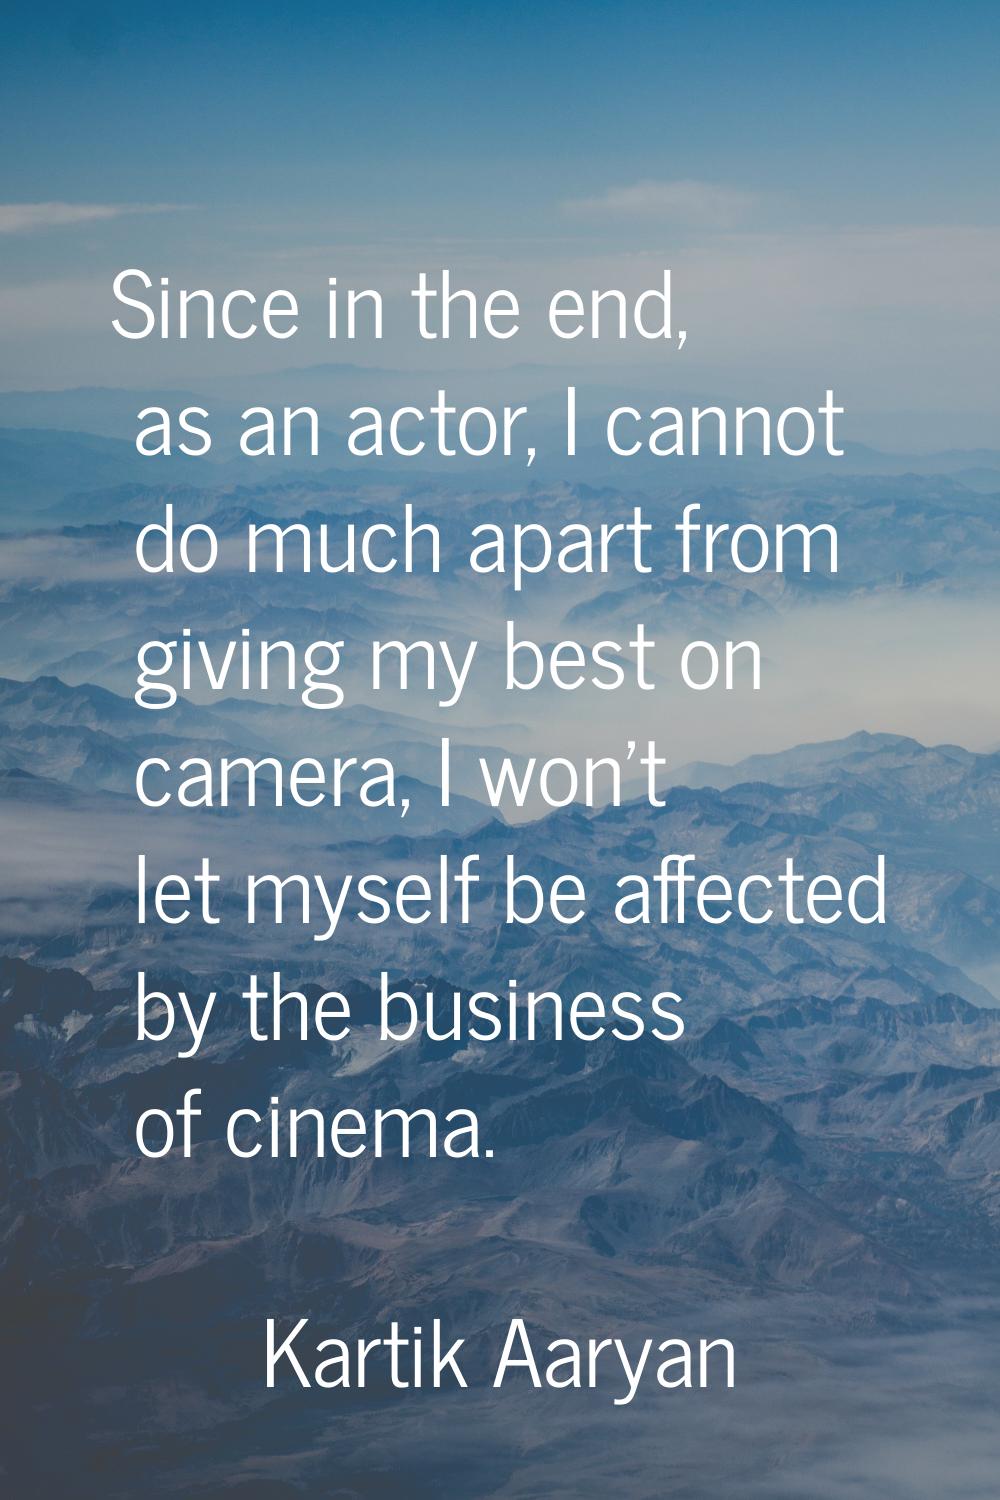 Since in the end, as an actor, I cannot do much apart from giving my best on camera, I won't let my